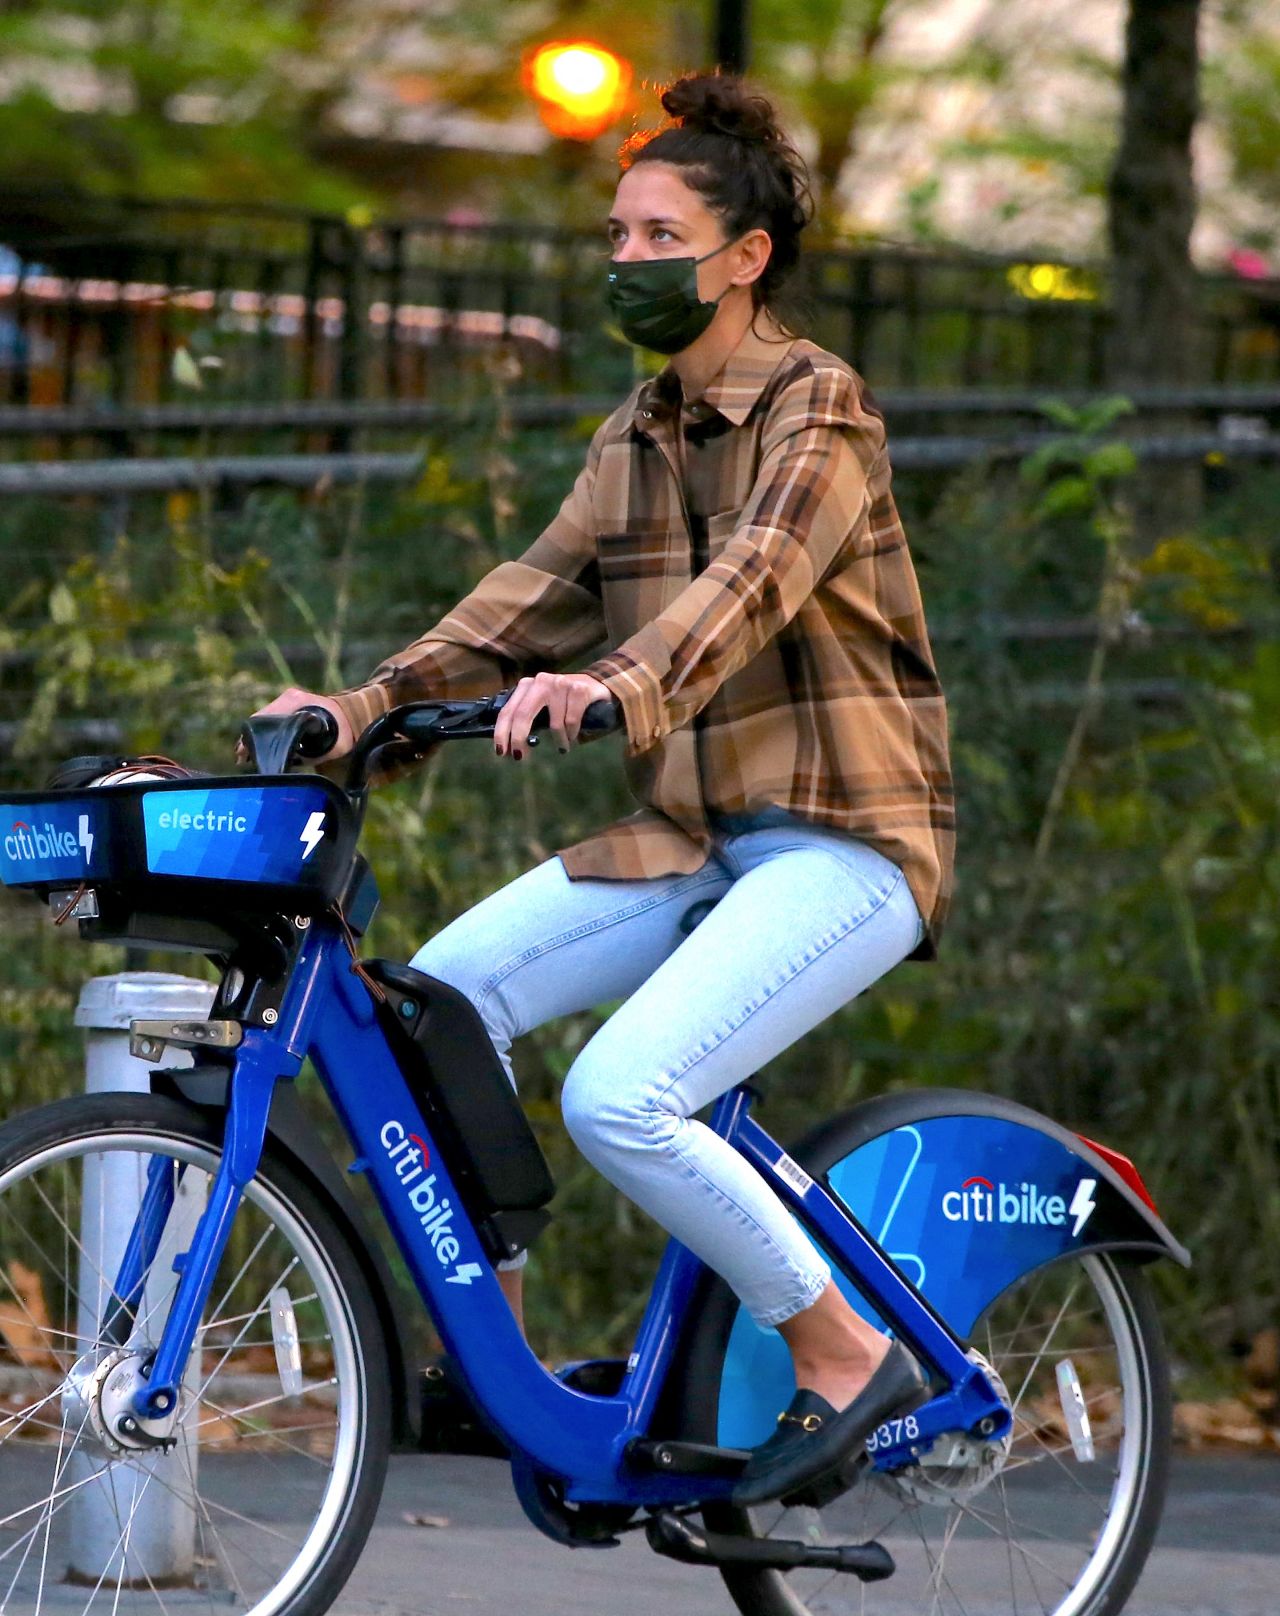 katie-holmes-riding-electric-citi-bike-in-the-lower-manhattan-ny-10-20-2020-1.jpg